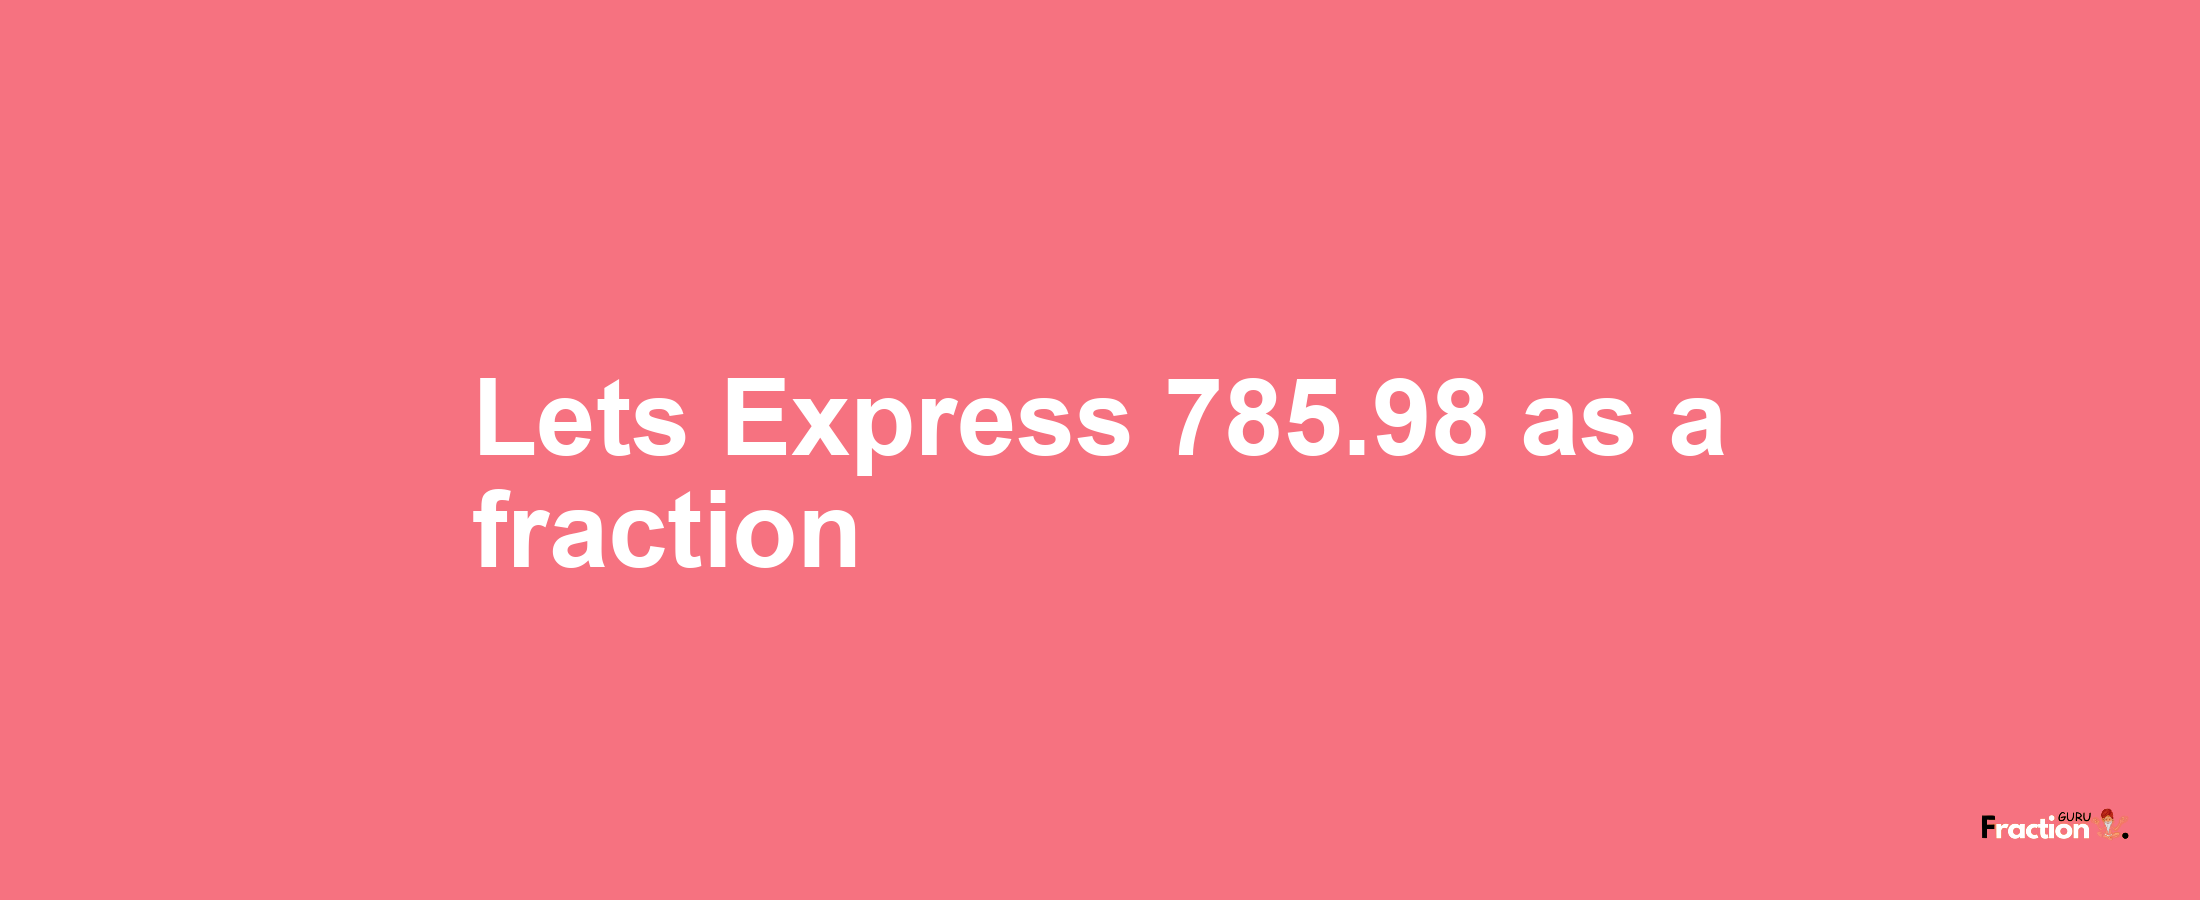 Lets Express 785.98 as afraction